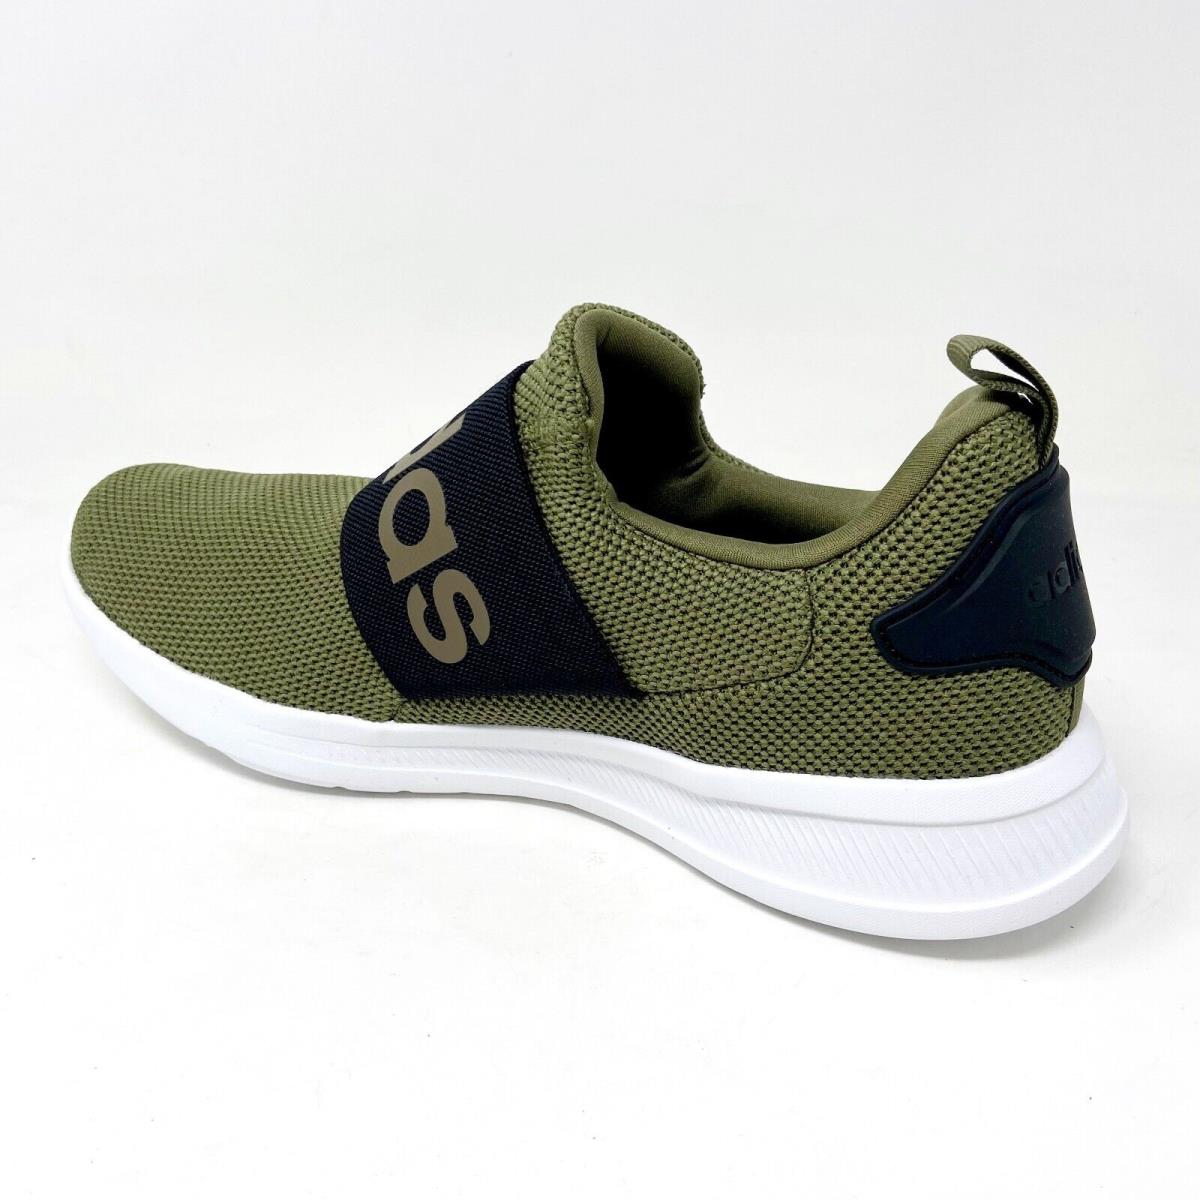 Adidas shoes Lite Racer - Green 1